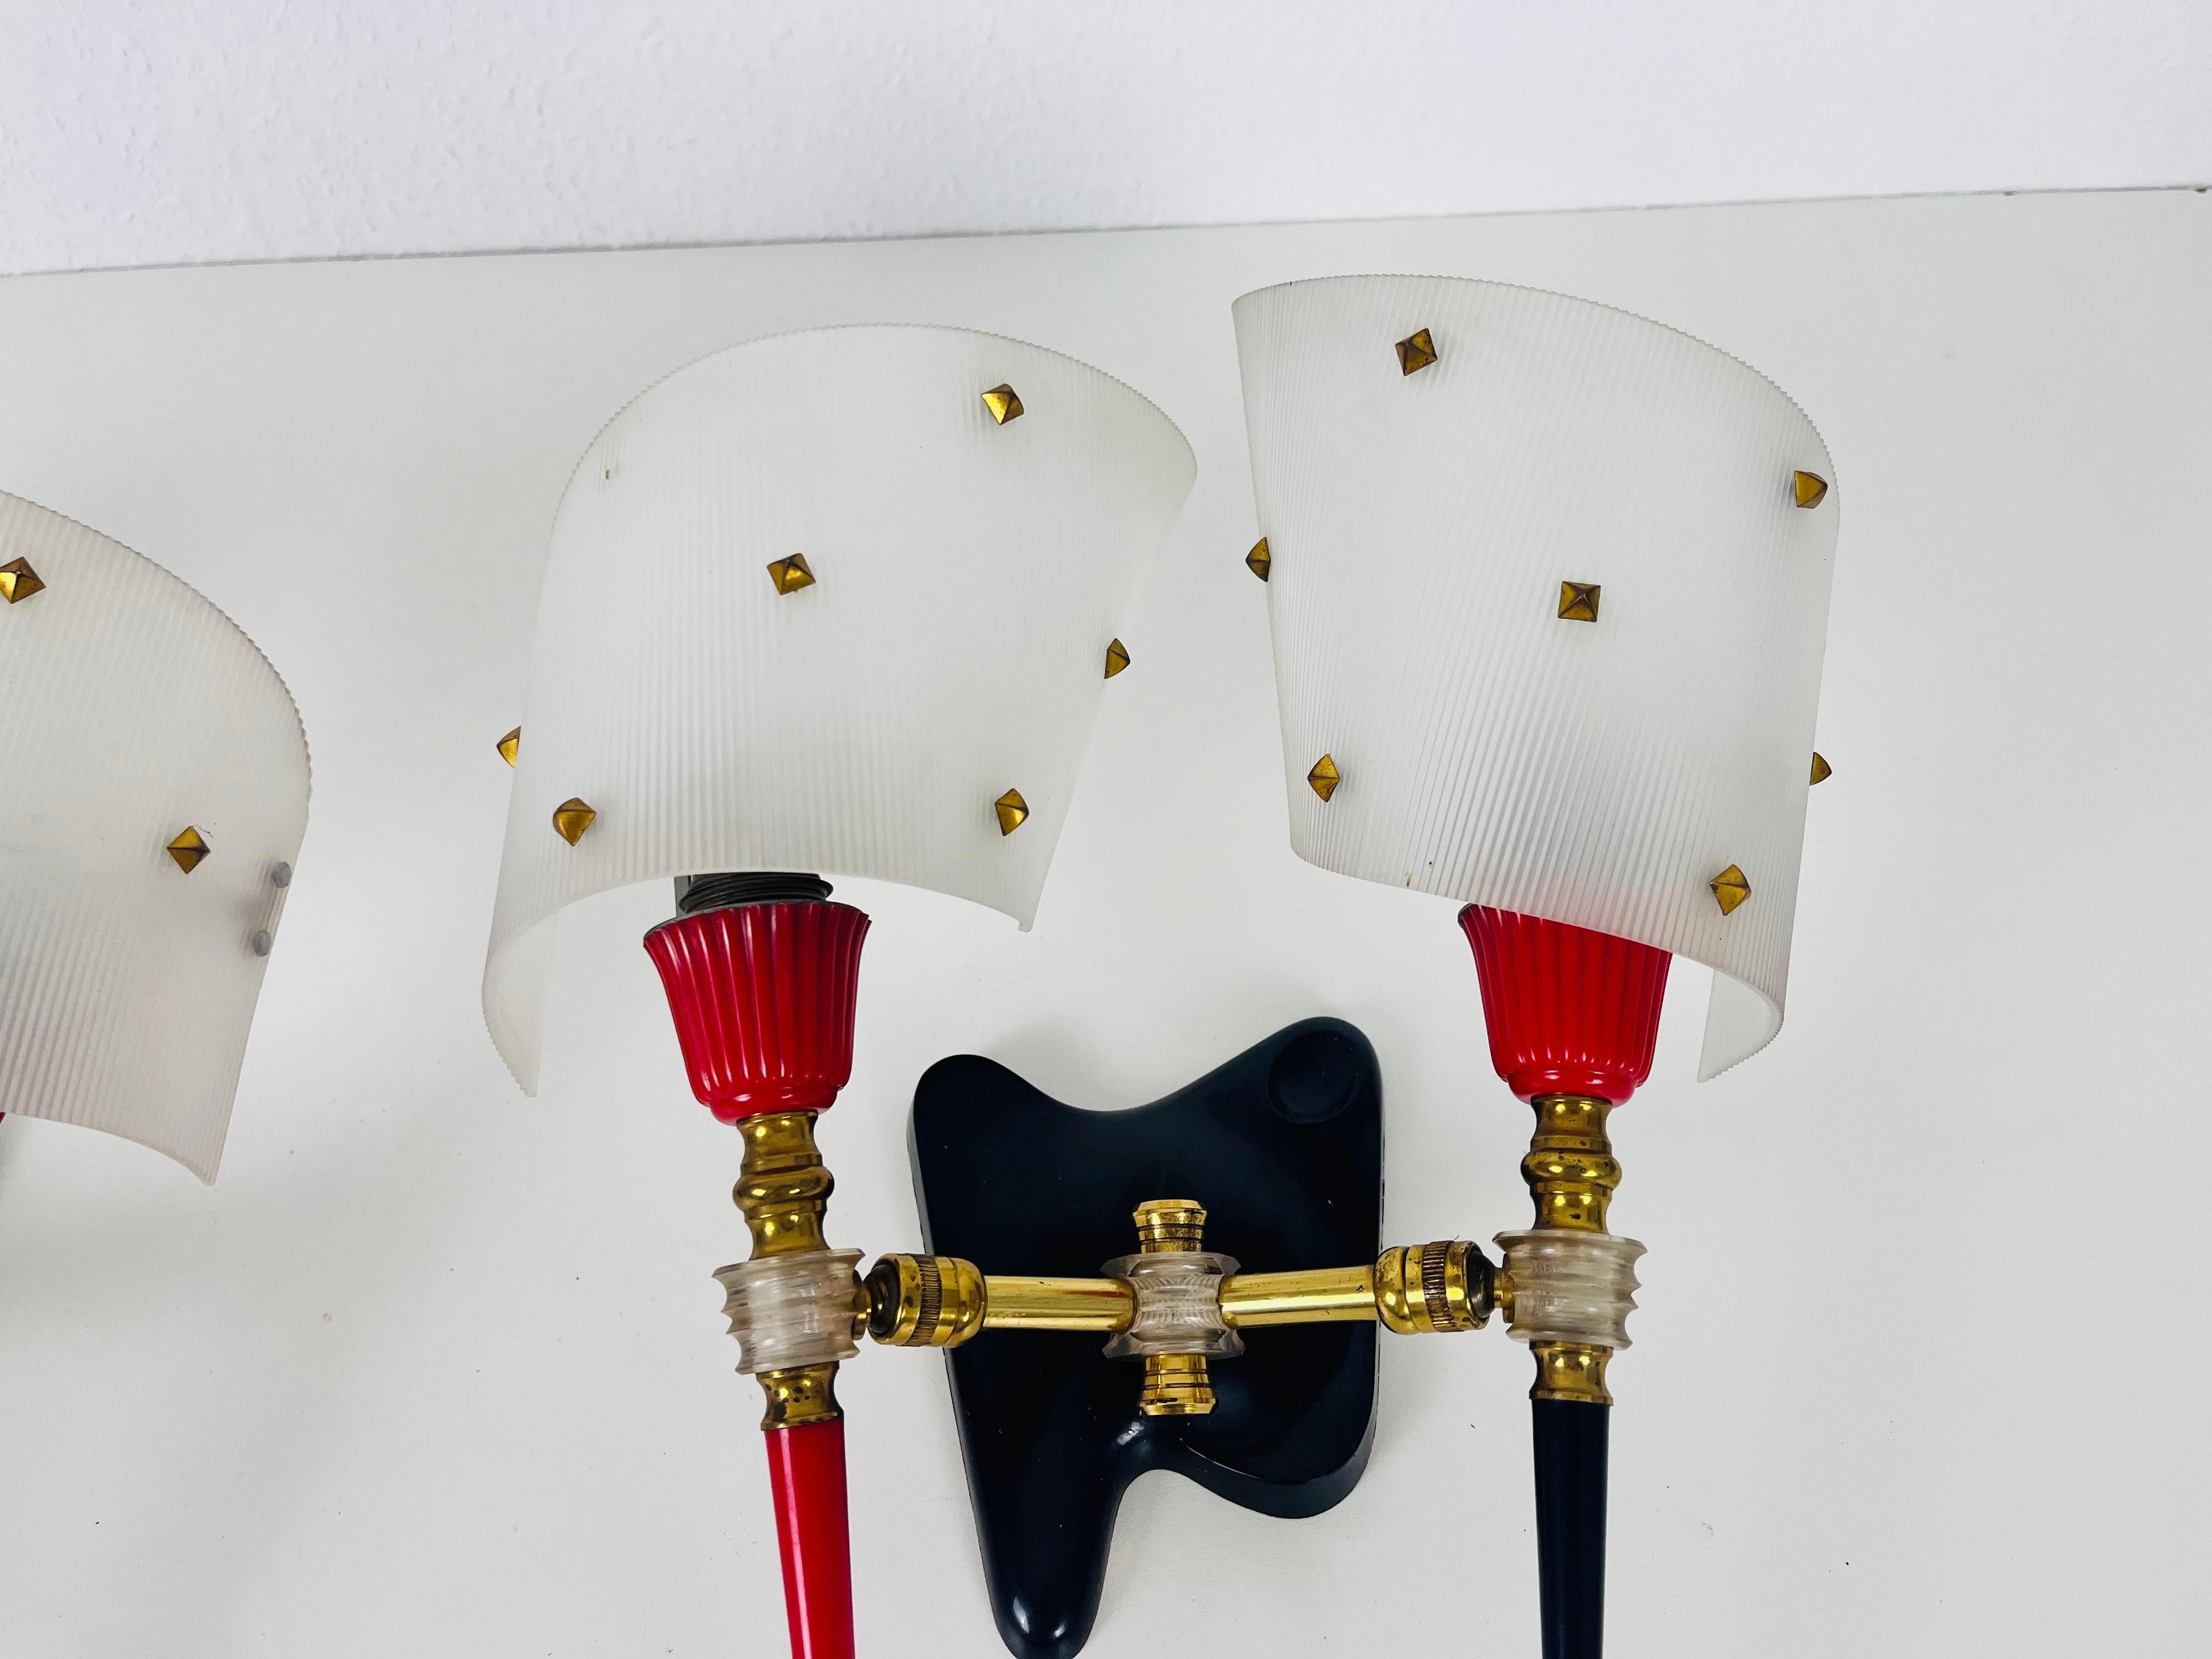 Plastic Pair of 2 Brass and Plexiglass Wall Lamps by Maison Arlus, 1960, France For Sale